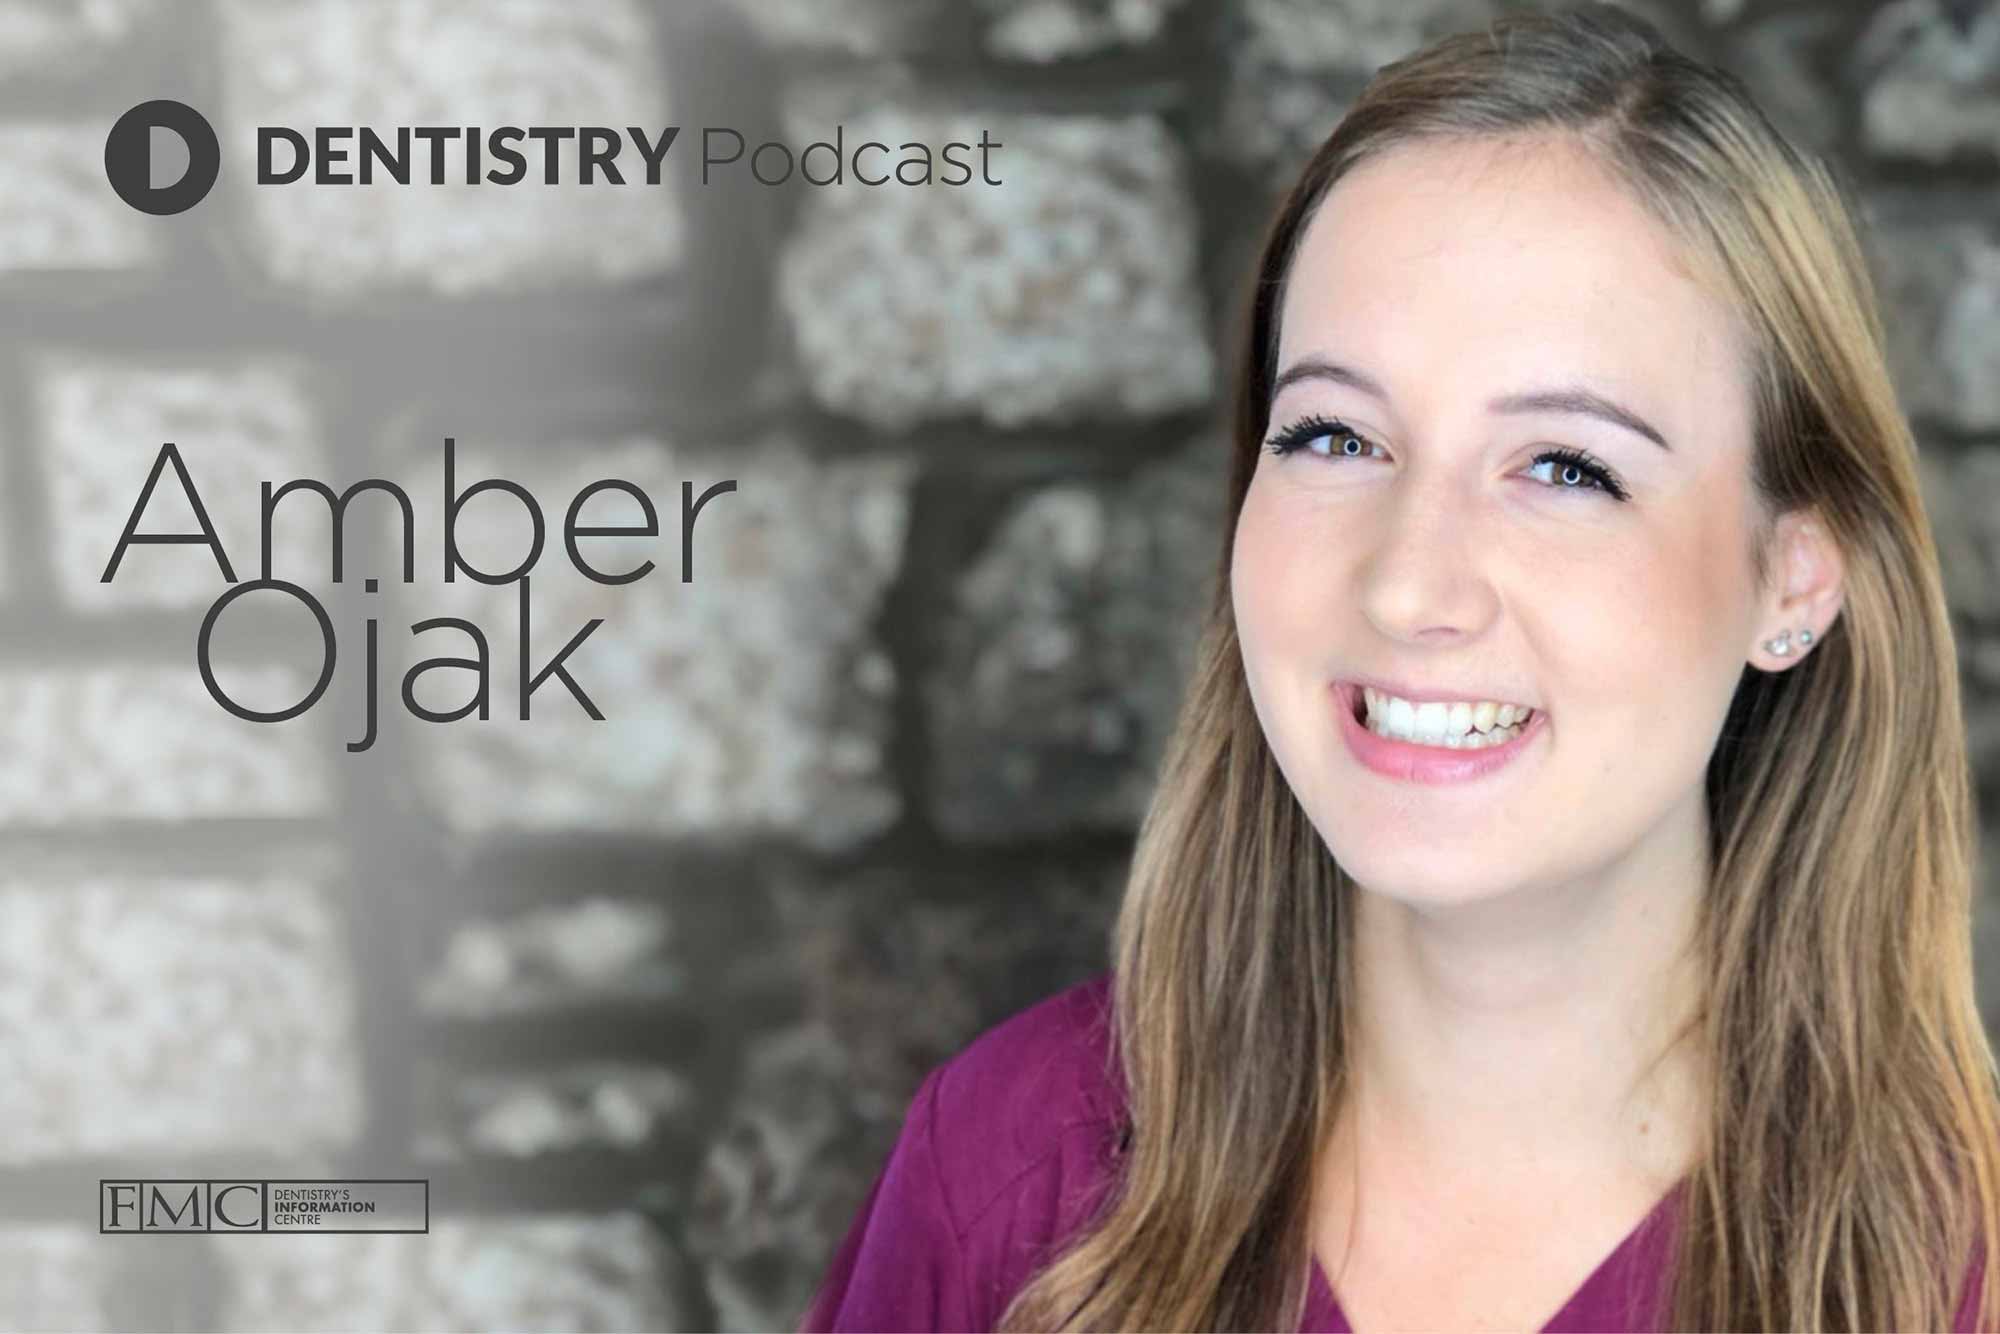 This week we welcome Amber Ojak who discusses why we need to reshape the perception of dental hygienists and therapists